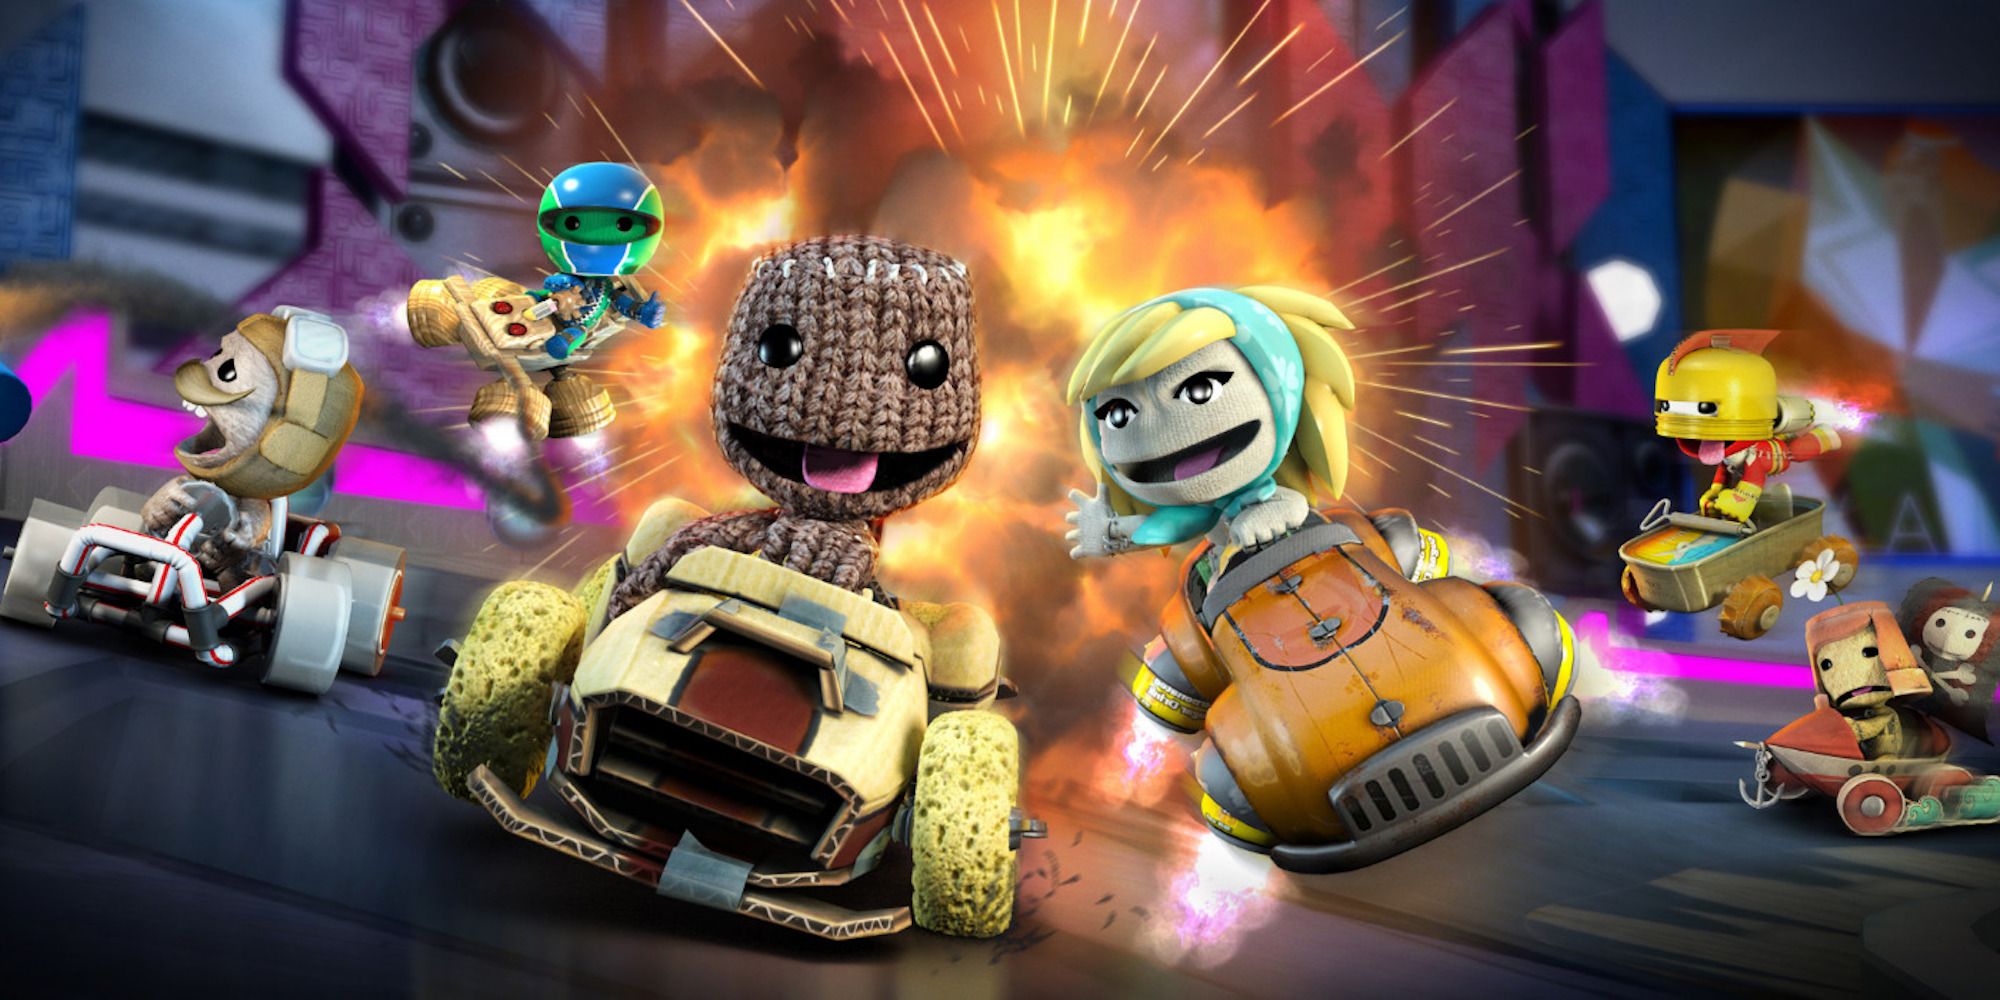 Promo art featuring characters from LittleBigPlanet Karting